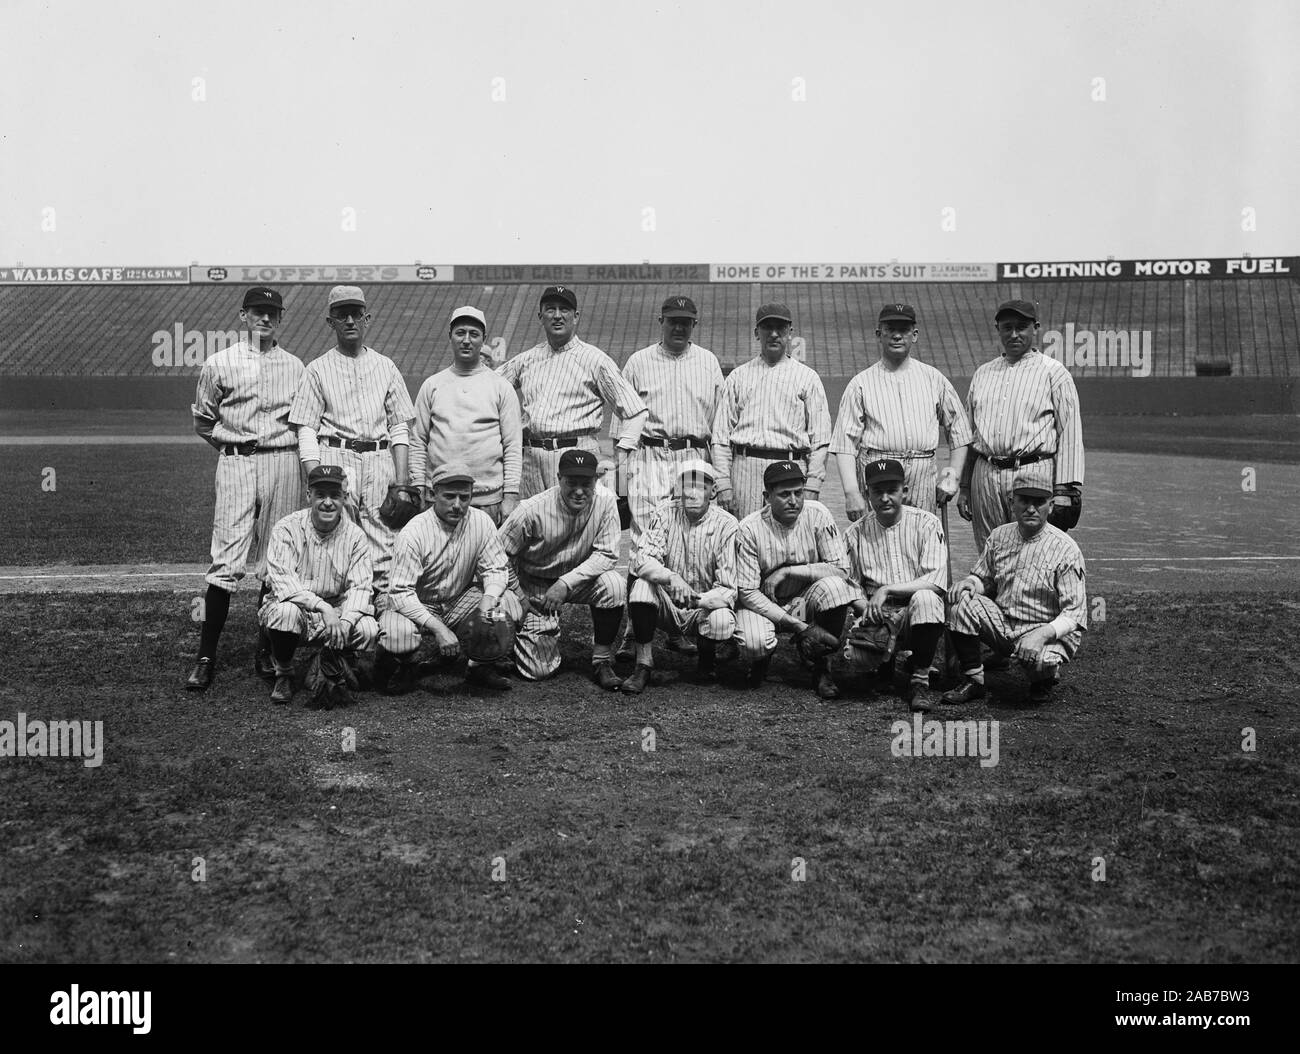 THE GREAT CHICAGO CUBS CLASSIC TEAM PHOTO FROM 1920'S